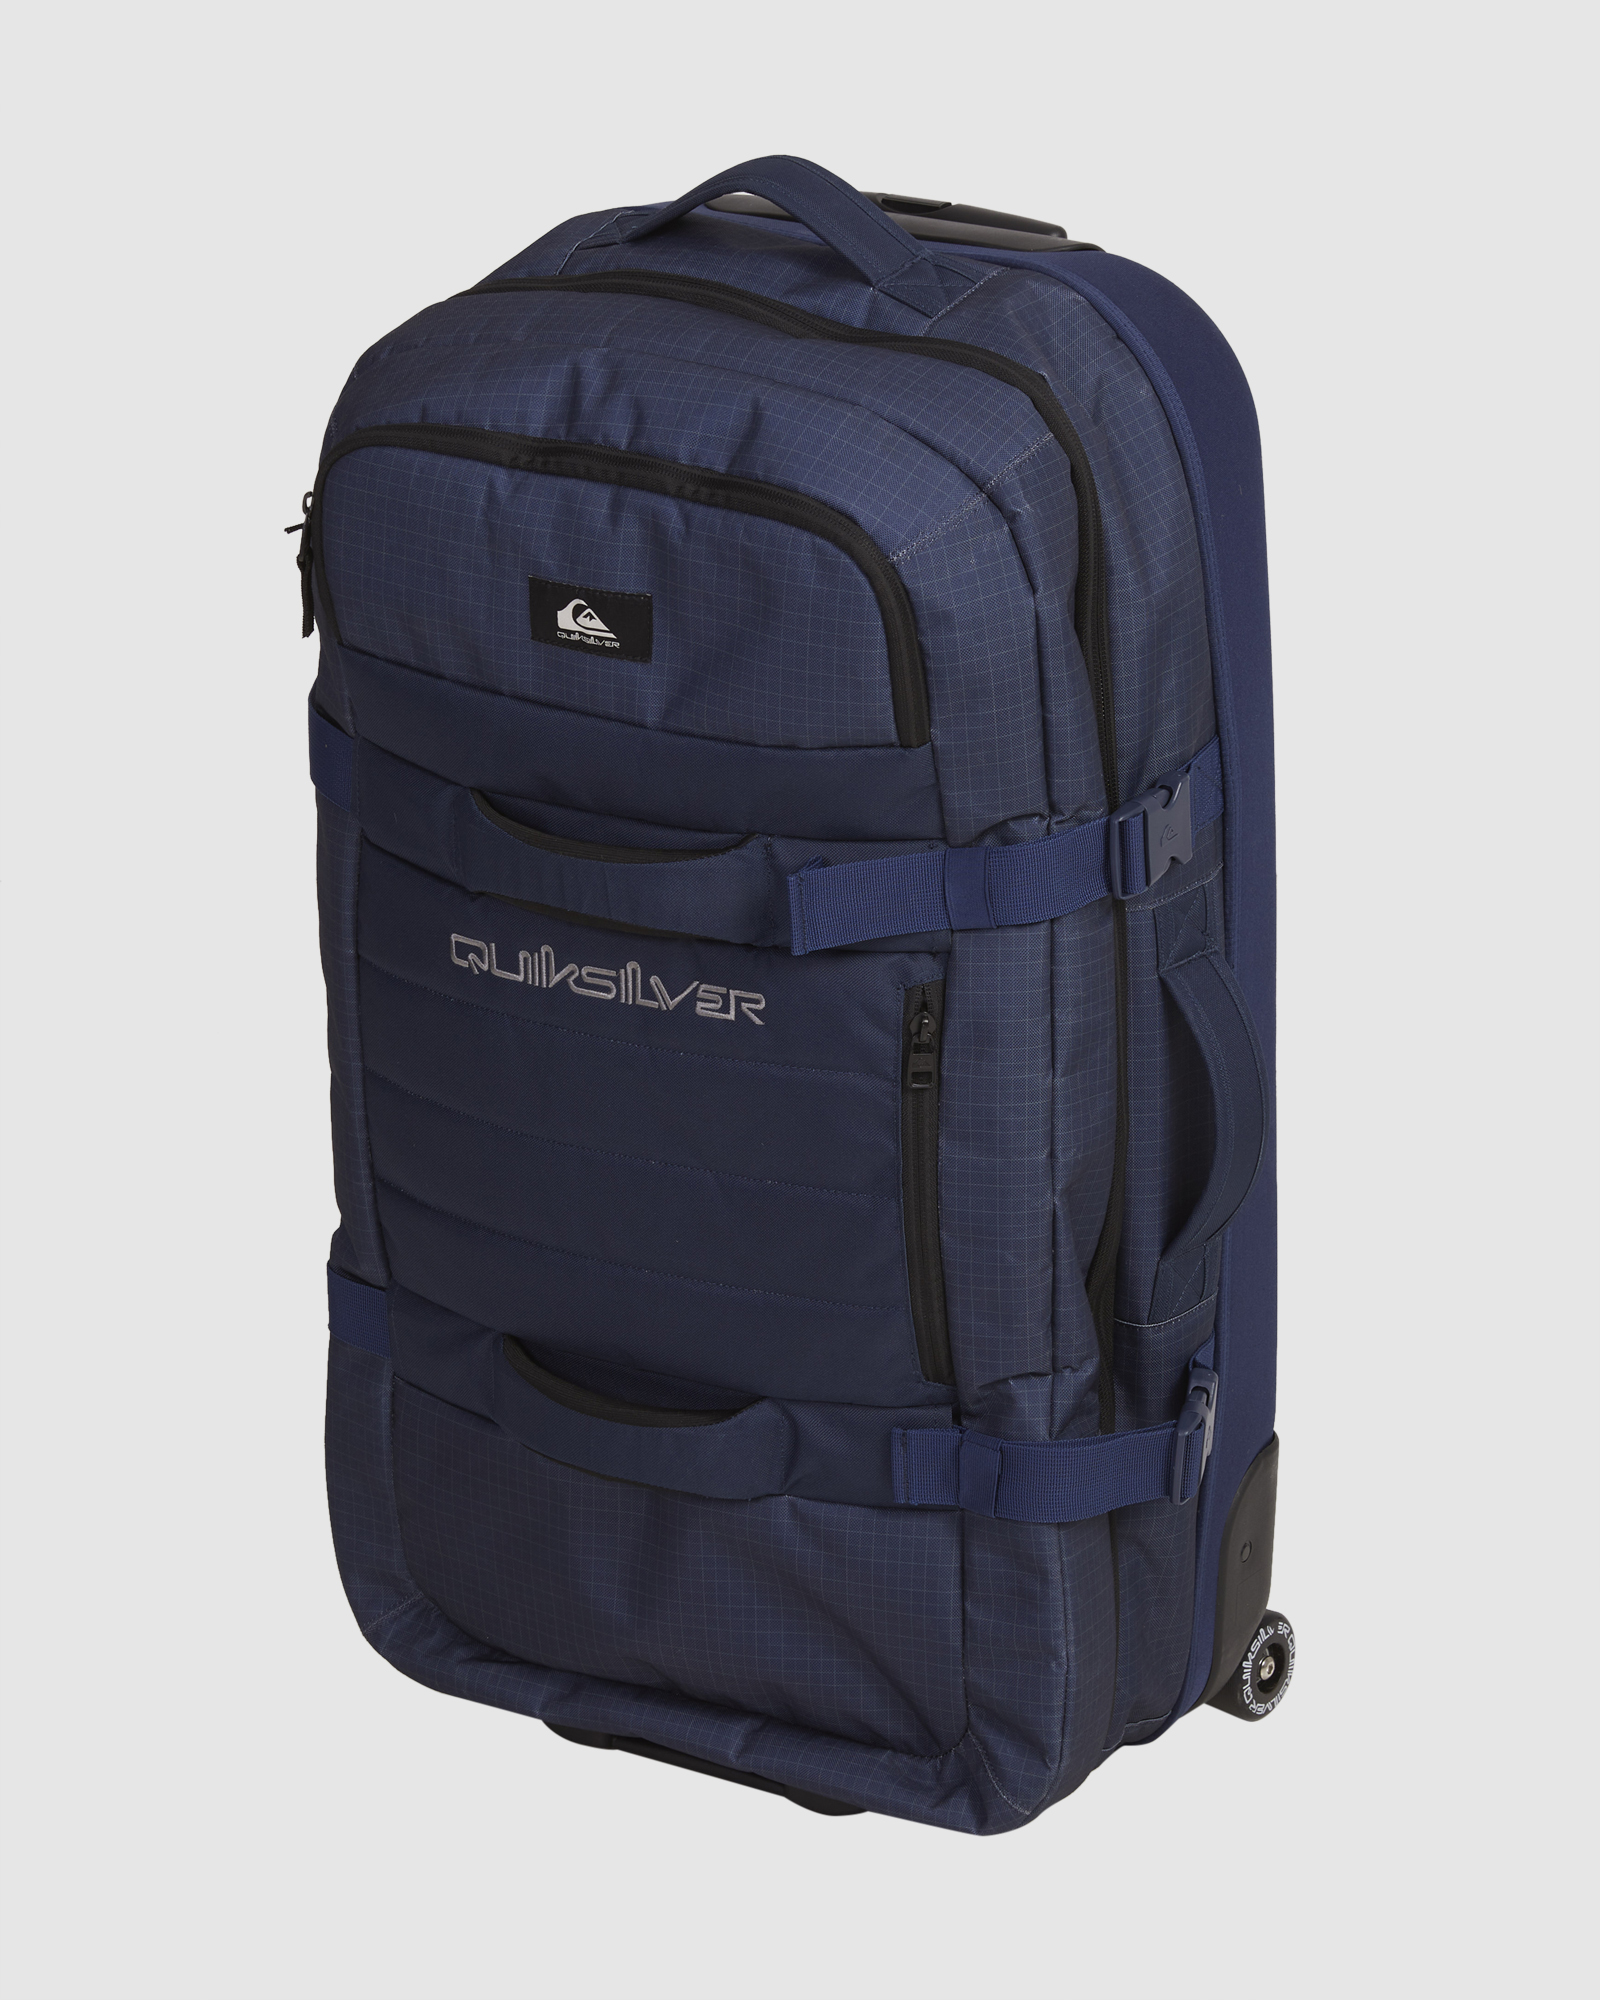 Quiksilver New Reach 100L Large Wheeled Suitcase - Naval Academy |  SurfStitch